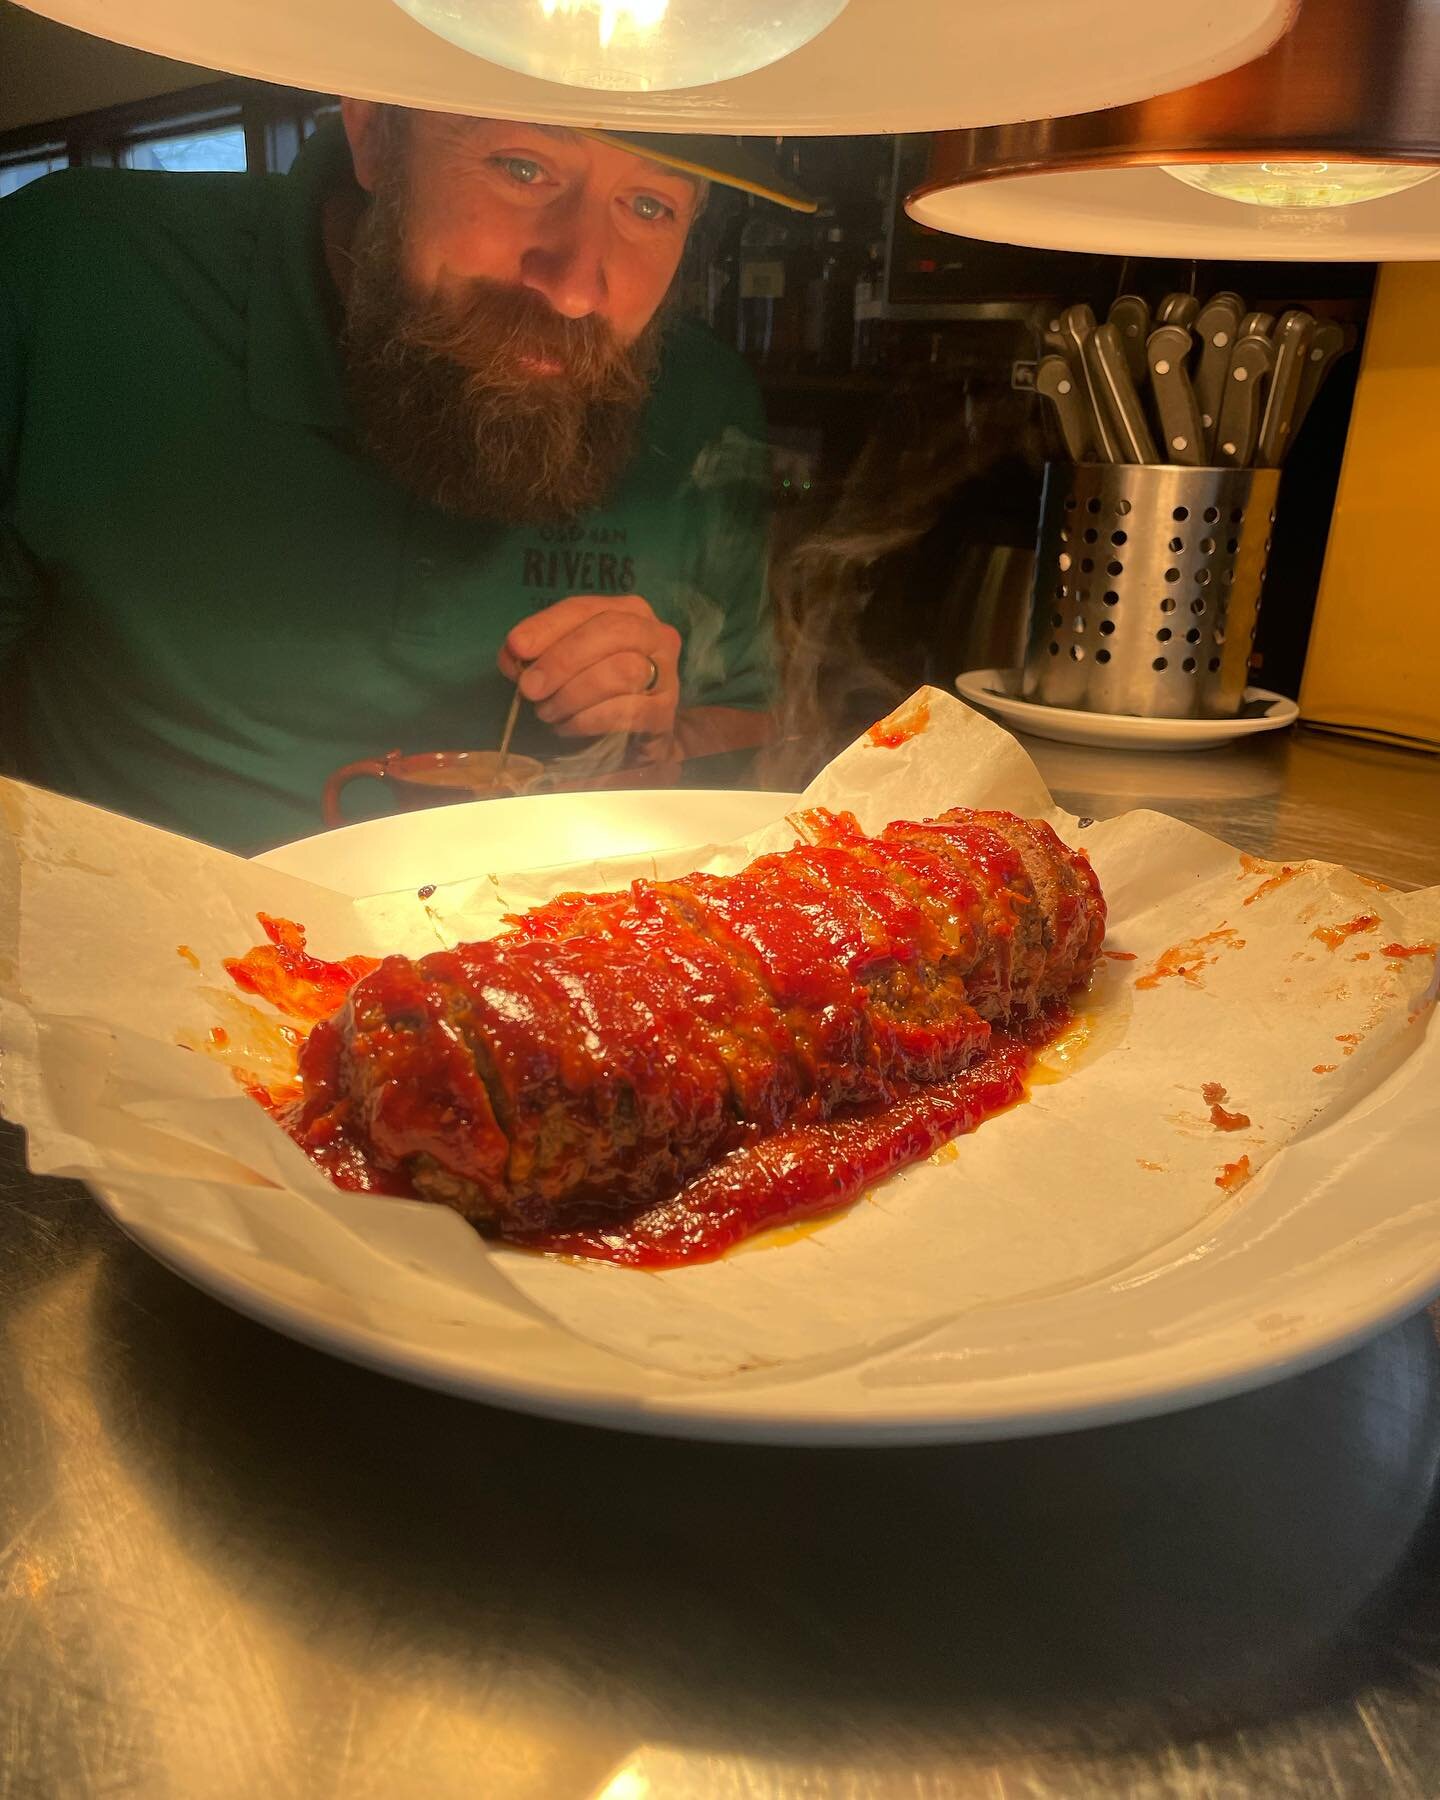 😍MEATLOAF FRIDAYS 🥹
-
While we always have a daily rotating Meat &amp; Two for the low price of $9.95 AND change up our dinner menu weekly, we still have a little bit of routine here believe it or not&hellip;
On FRIDAYS, we always offer Chef&rsquo;